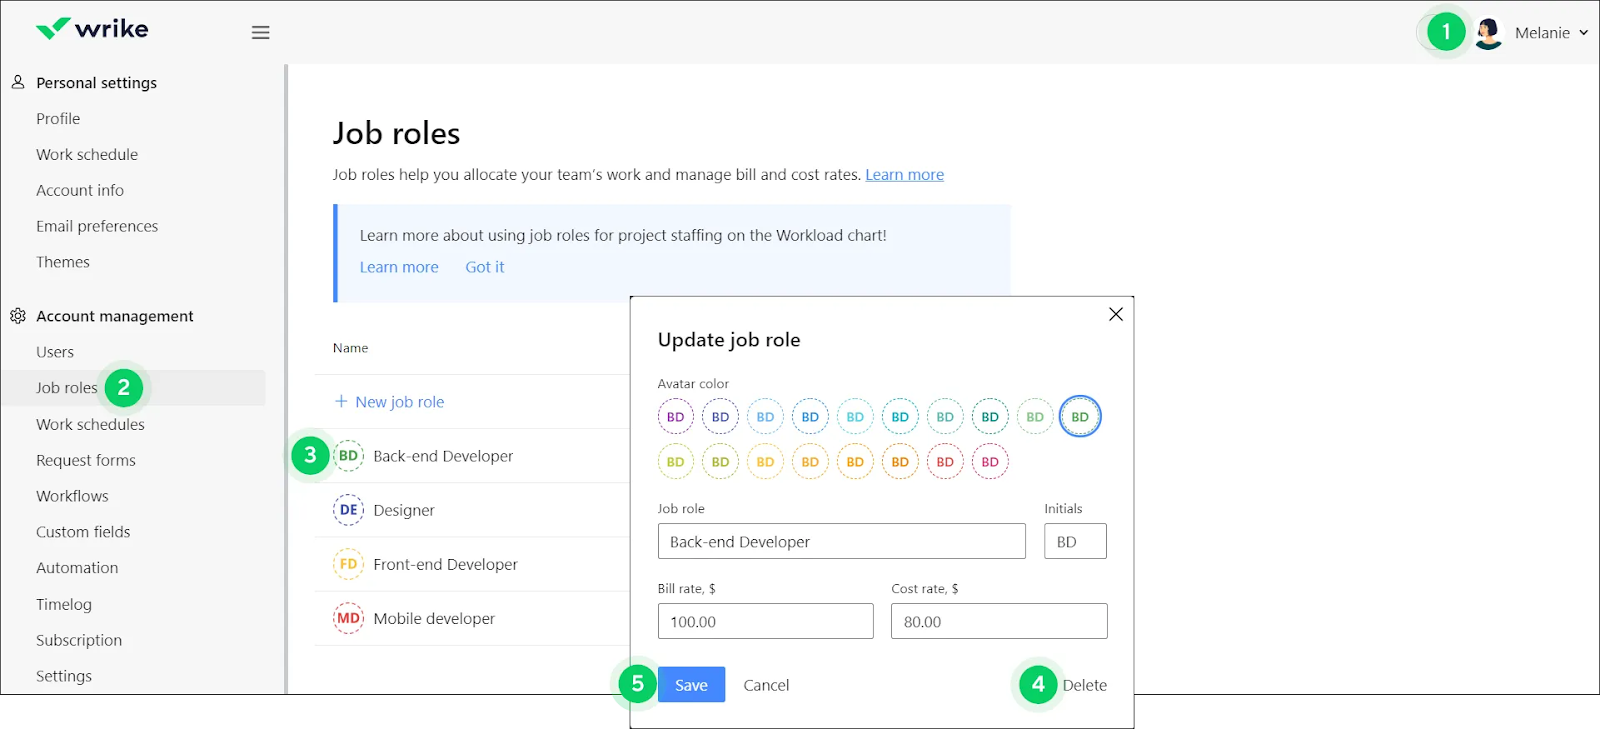 The Wrike interface shows the "Job roles" feature with a dialog box for updating a job role.